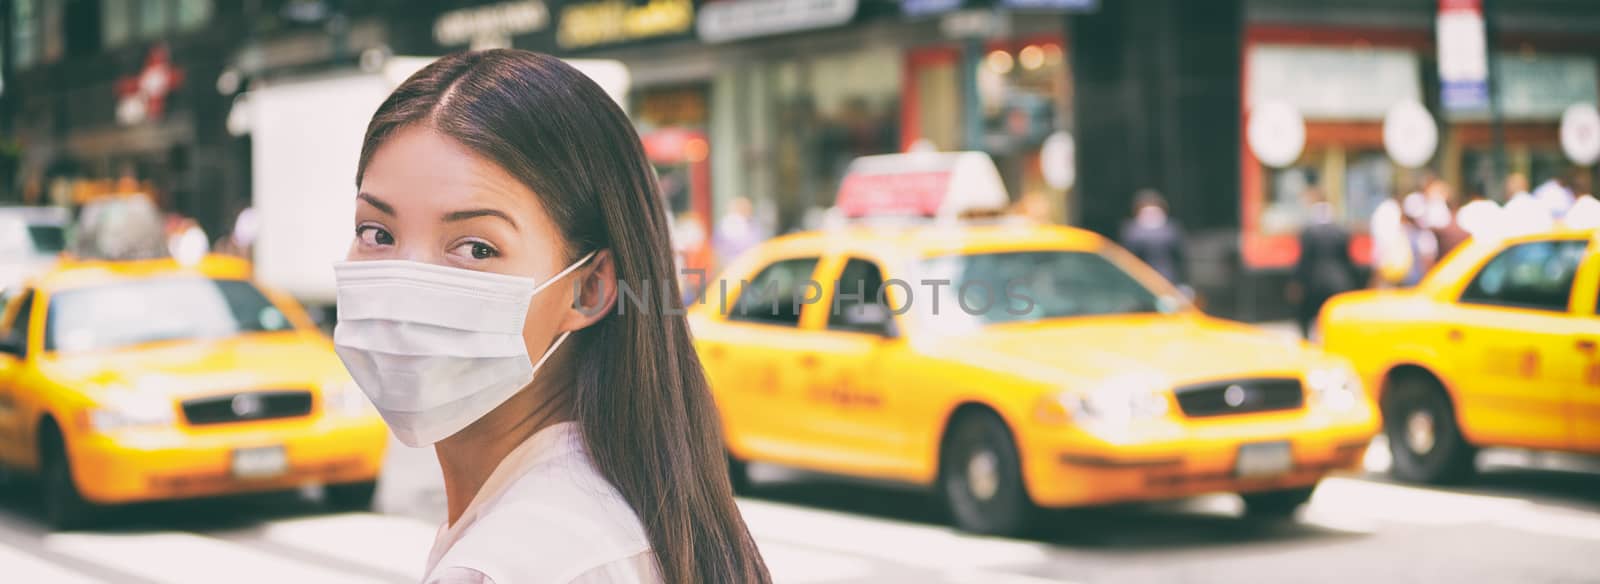 Corona virus travel ban China woman tourist walking in New York city street wearing surgical mask coronavirus protection, outbreak spreading scare. Panoramic banner background of traffic taxi cabs.